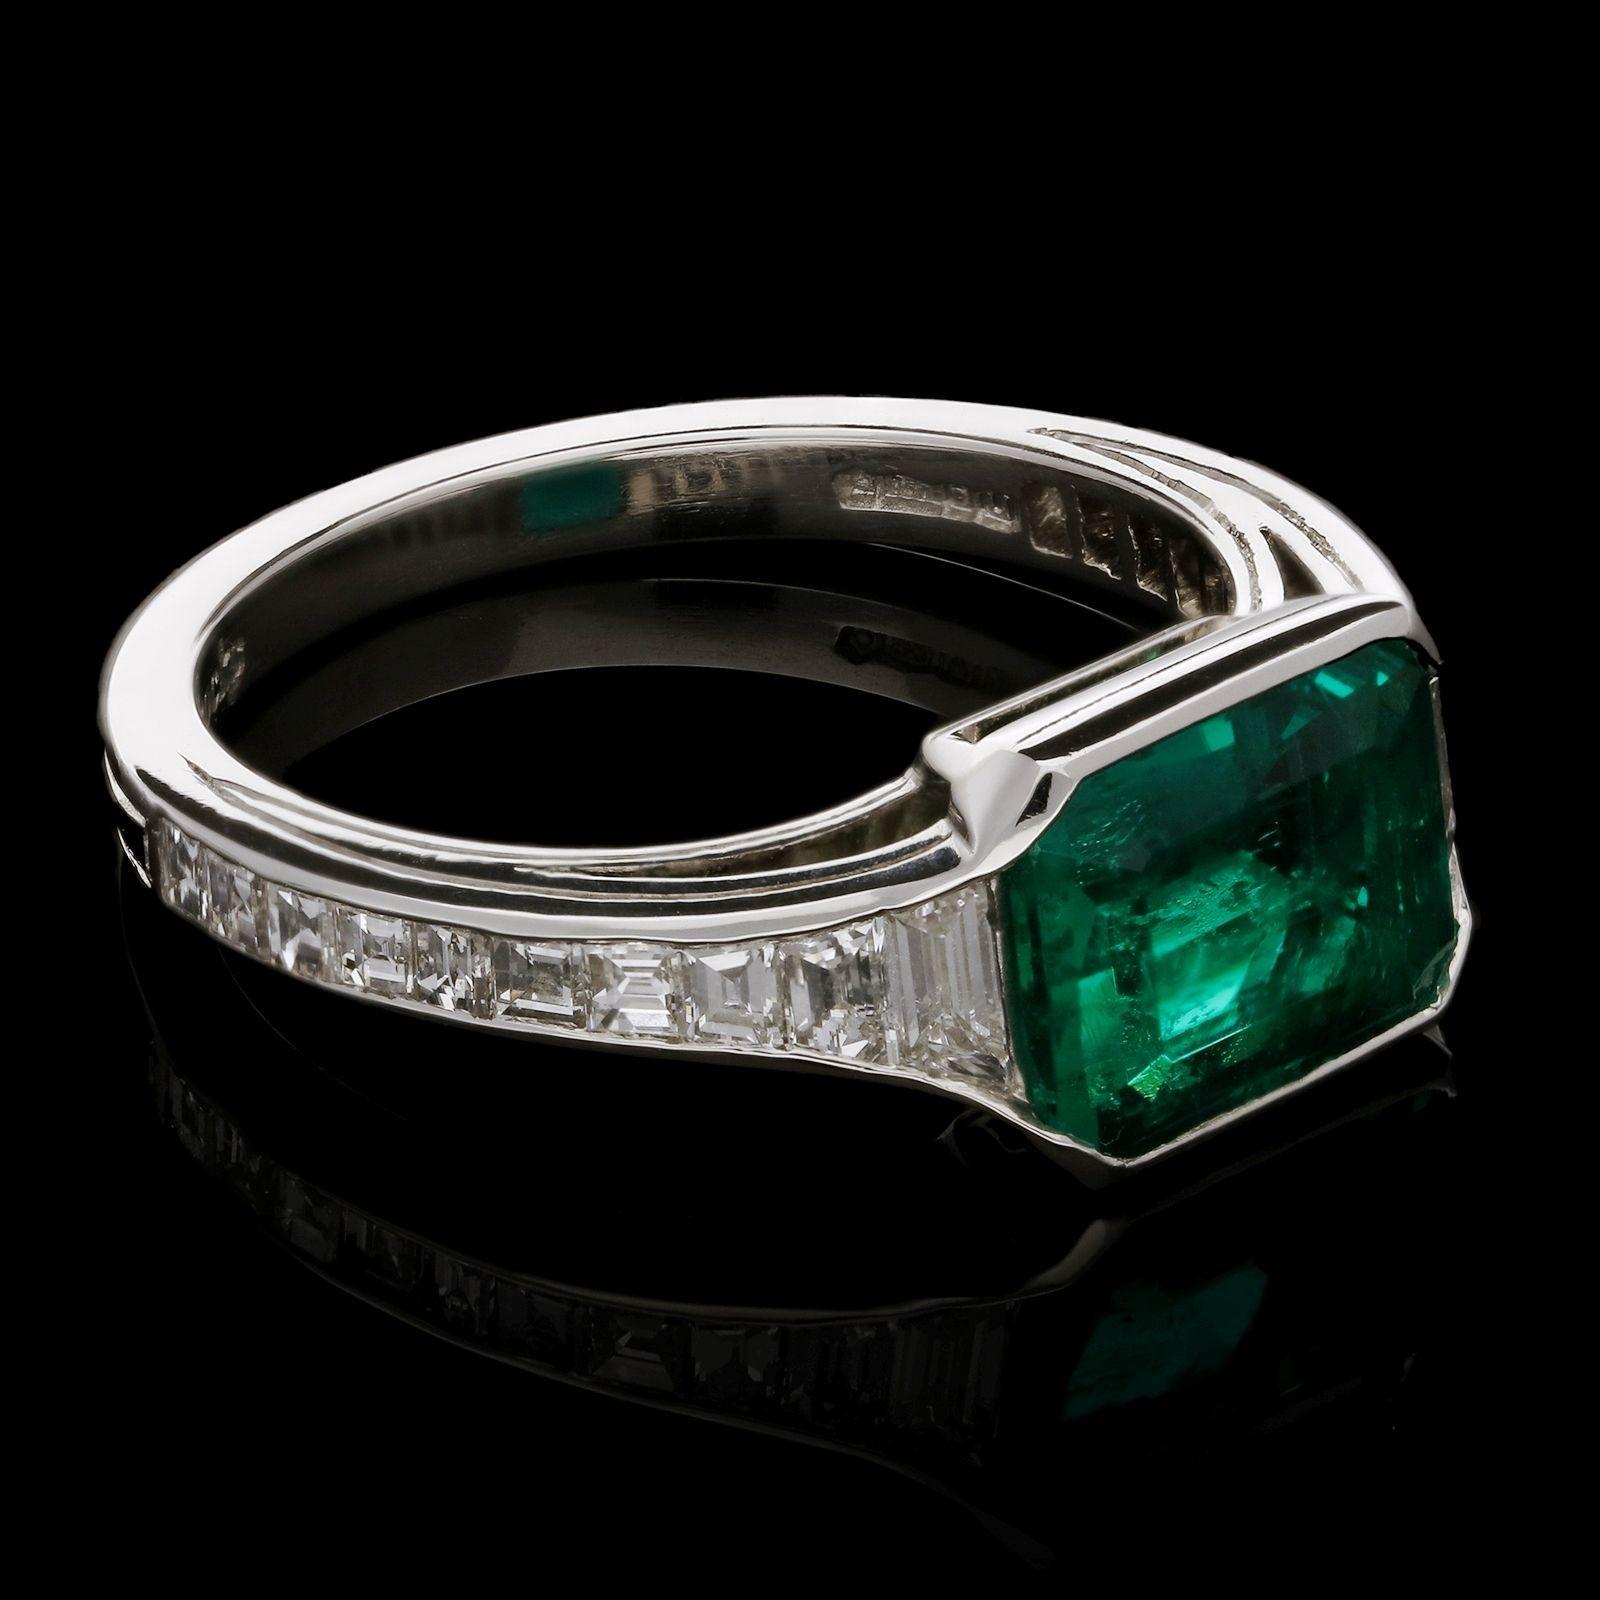 An elegant emerald and diamond ring by Hancocks set horizontally to the centre with an emerald-cut emerald in rubover setting between tapering shoulders set with calibre step-cut diamonds, all in a finely handcrafted platinum